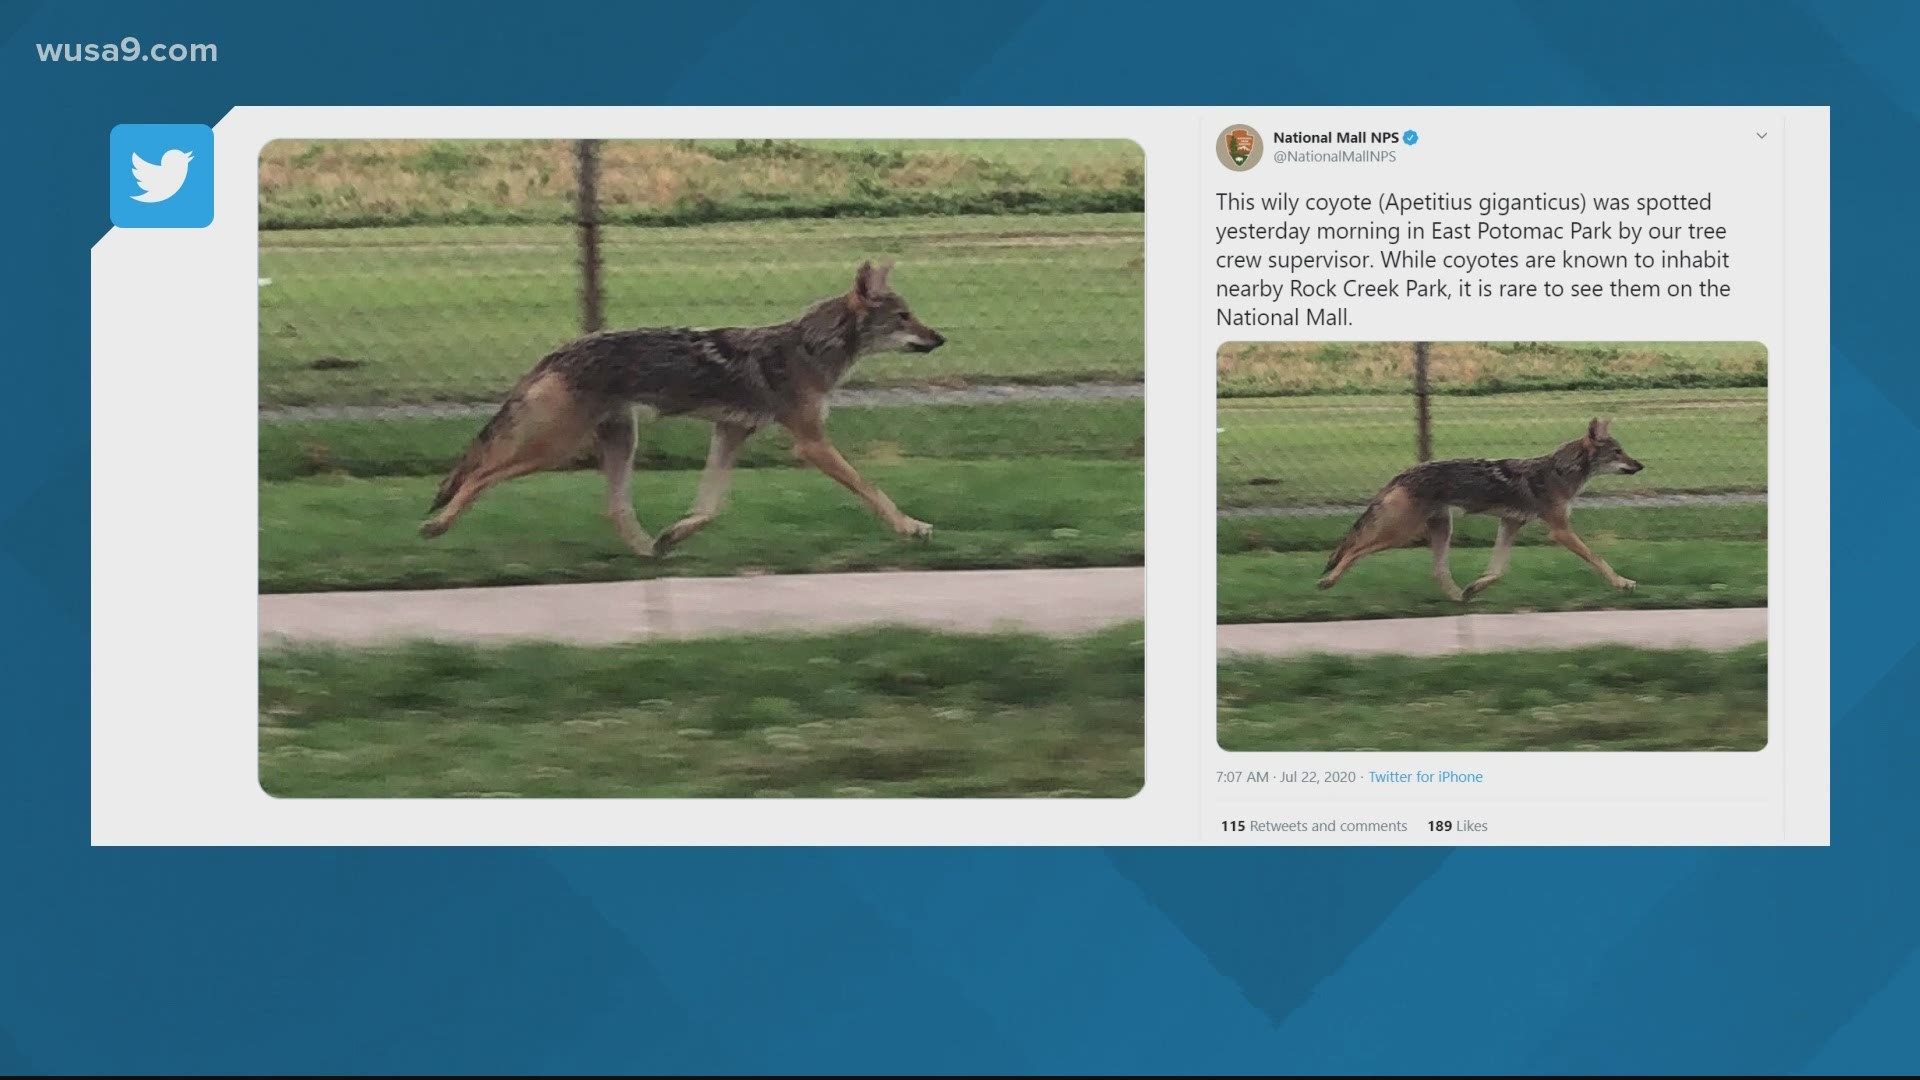 NPS tweeted out a picture of the coyote that was spotted at the park by a tree crew supervisor.